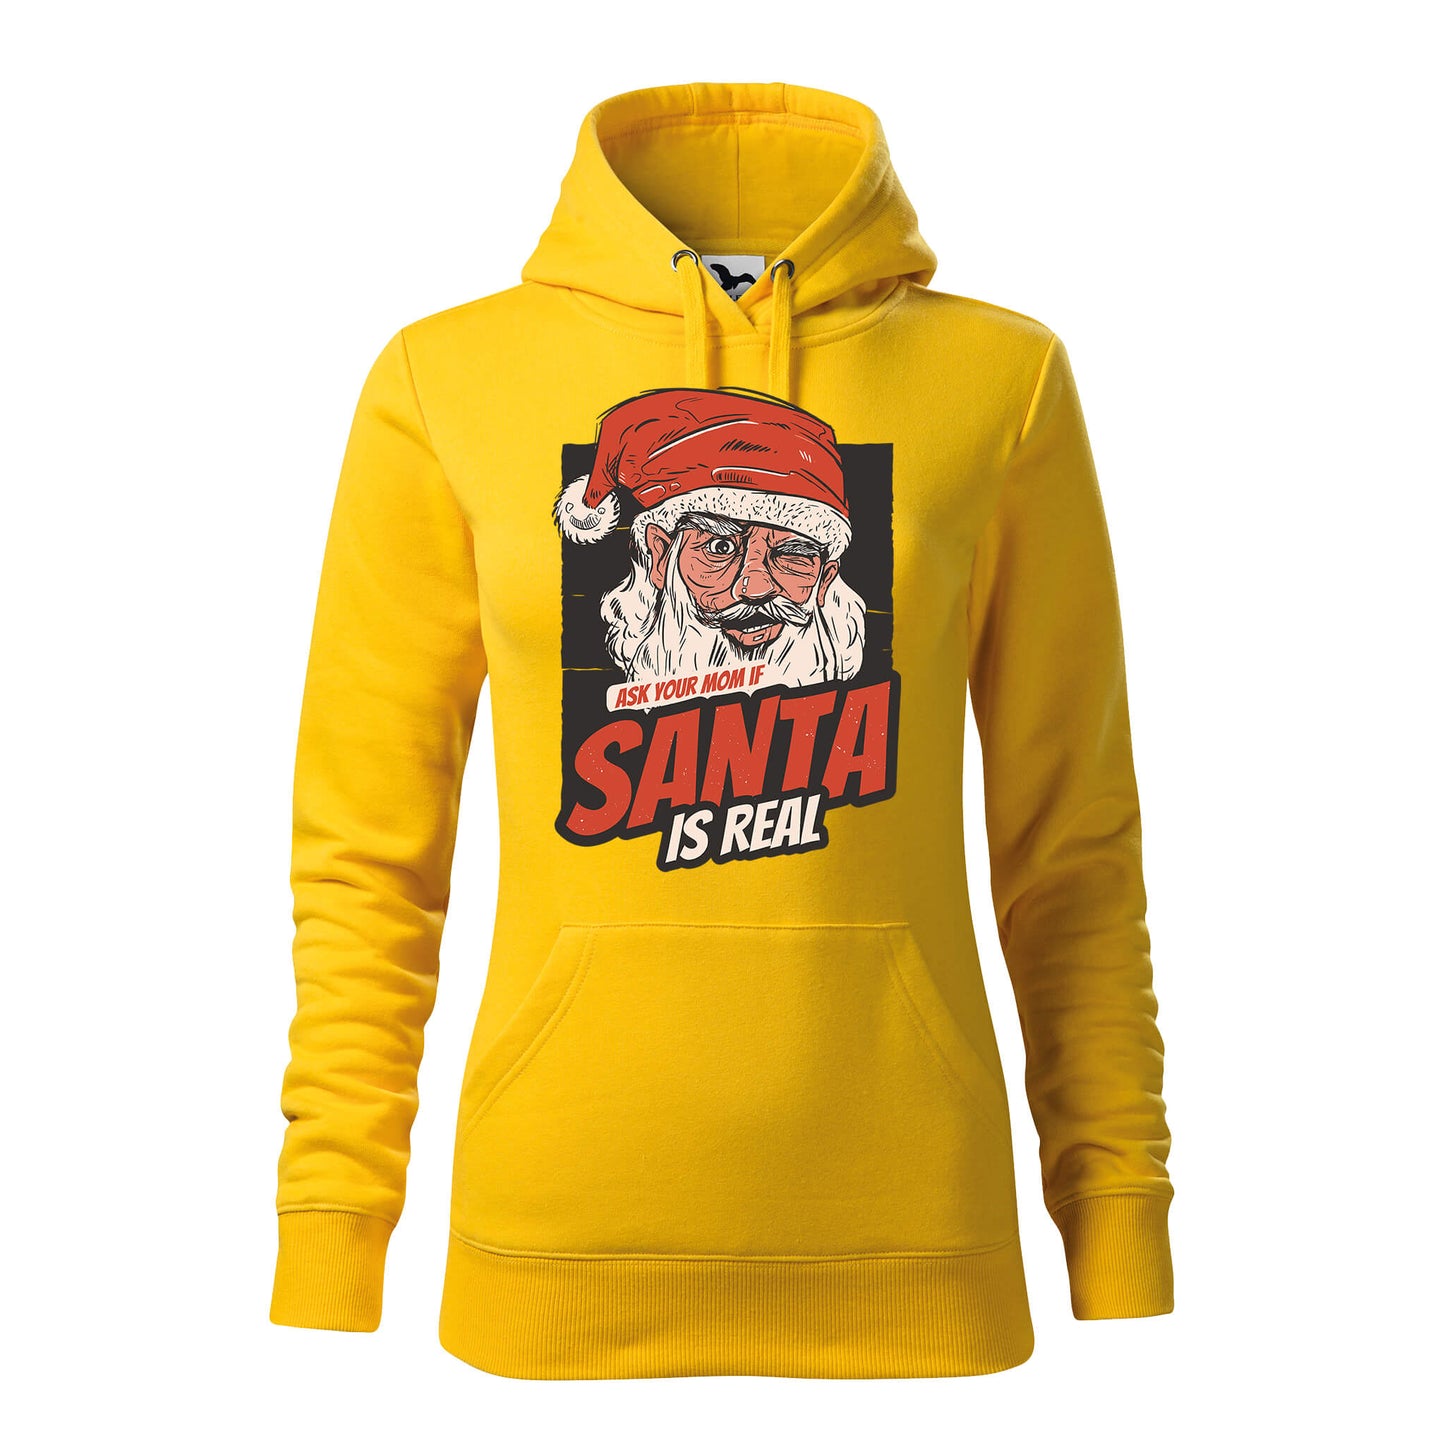 Ask your mom if santa is real hoodie - rvdesignprint